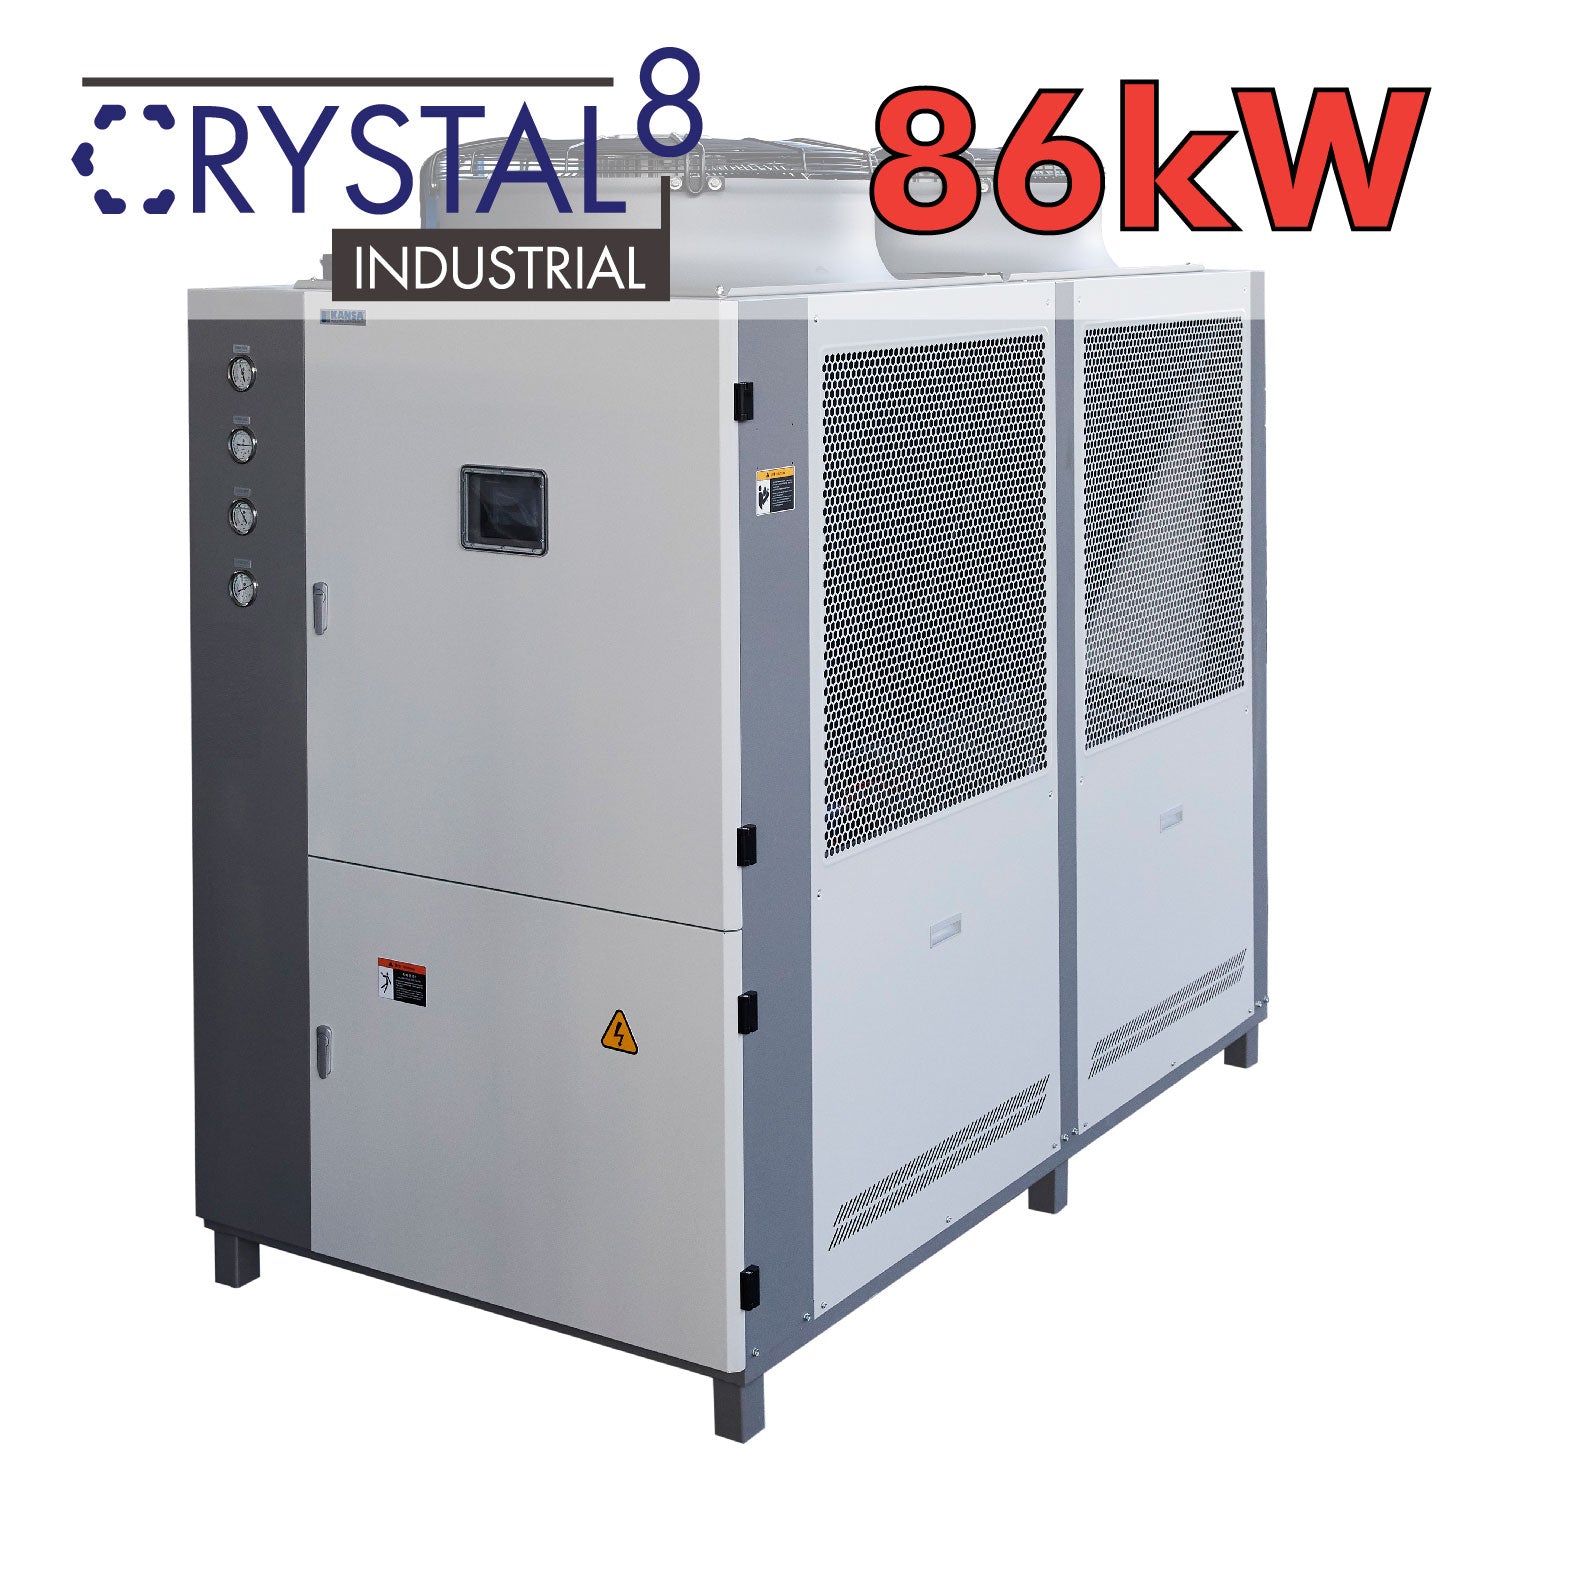 Compact and powerful 86kW Glycol Chiller.